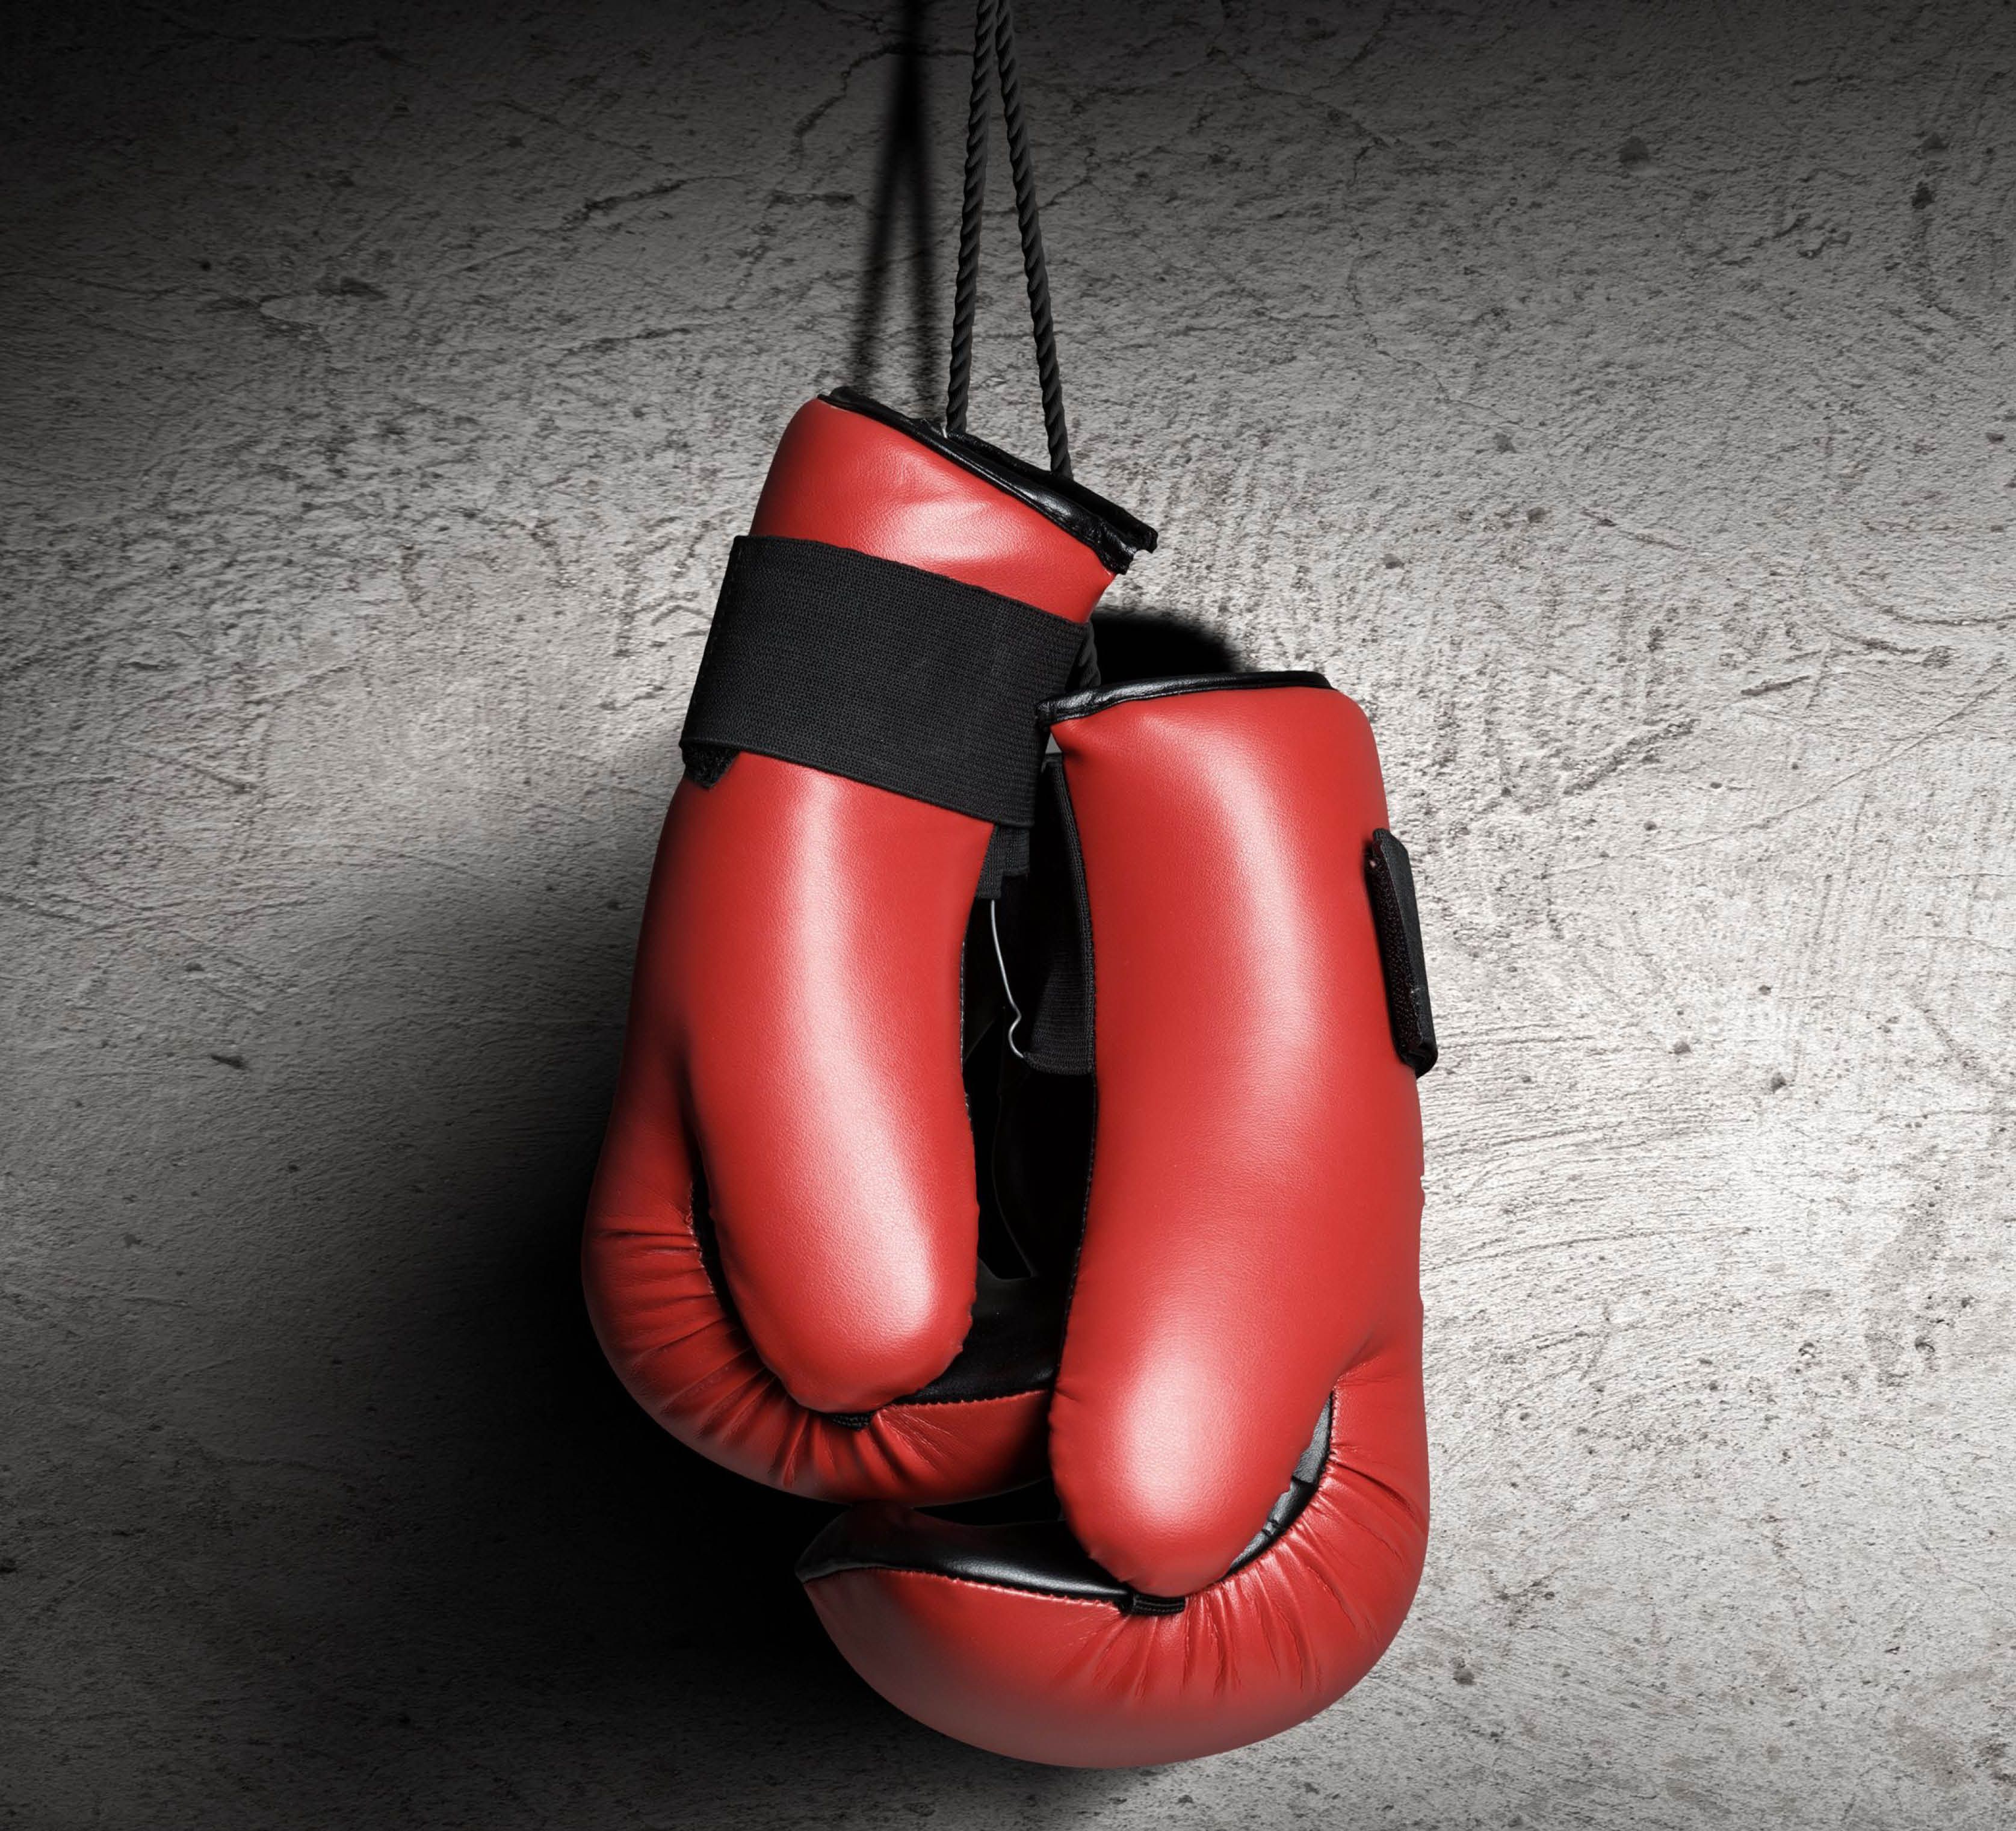 Boxing wallpaper Android Apps on Google Play. Boxing gloves, World boxing, Sparring gloves